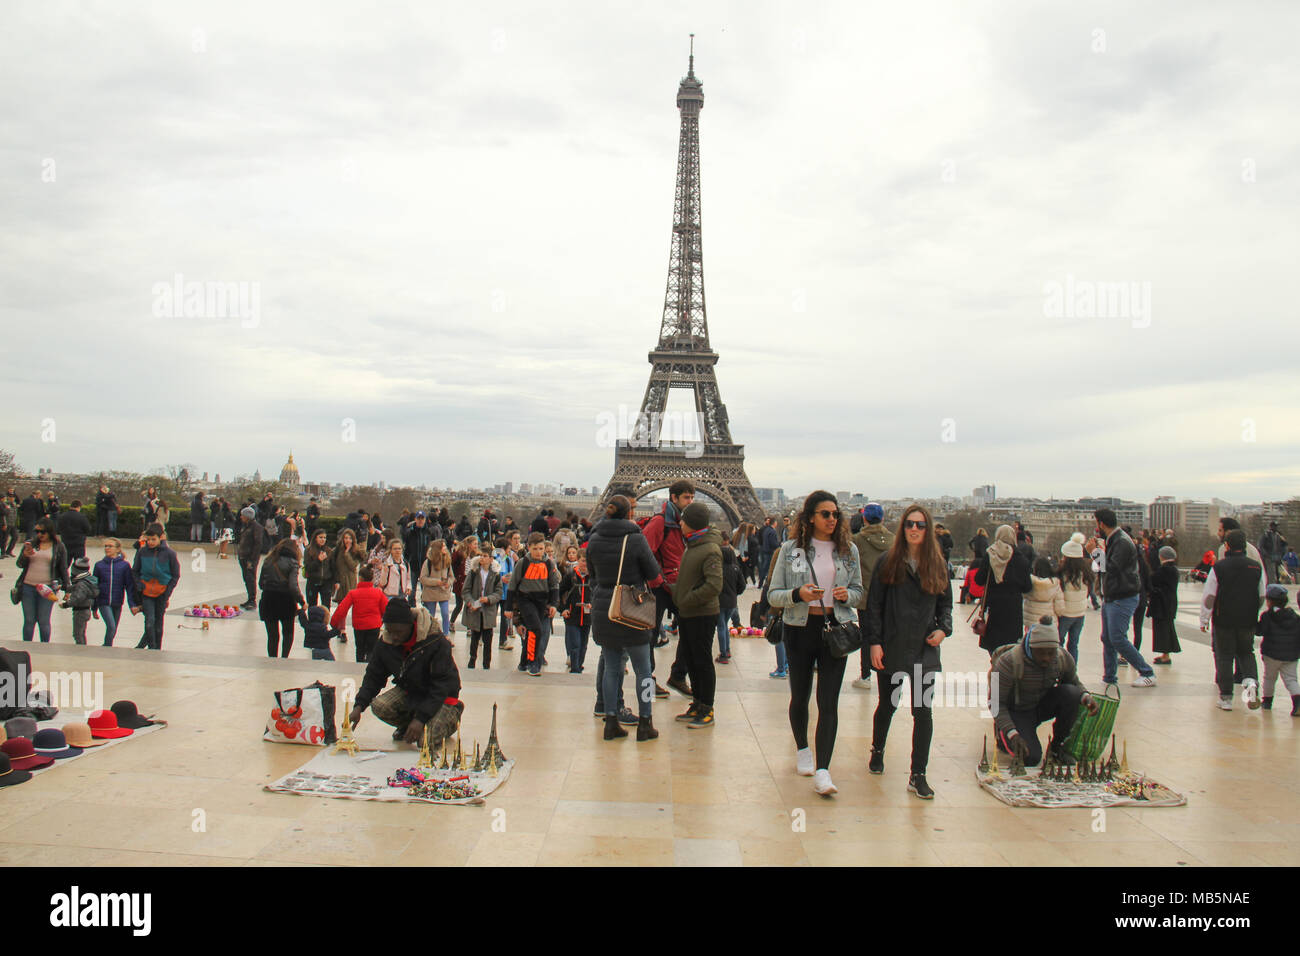 Paris, France -  02 April 2018. Tourists are seen Palais de Chaillot , Trocadero on 01 April with the Eiffel Tower seen on the background. General view of Paris, France. @ David Mbiyu/Alamy Live News Stock Photo